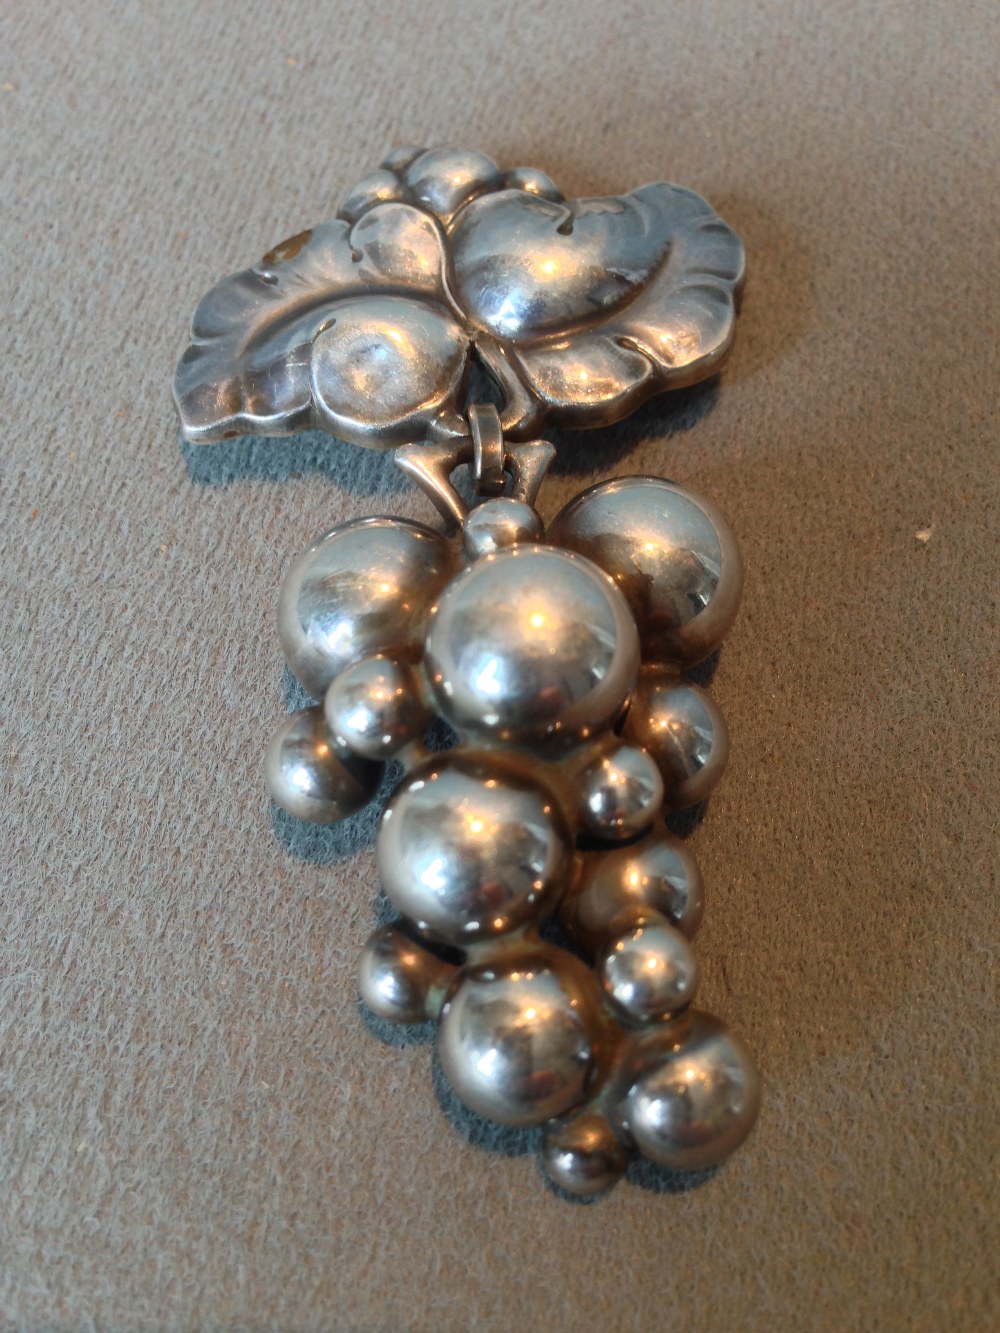 A George Jensen silver pendant brooch
Formed as a bunch of grapes, the reverse stamped 925 Denmark.